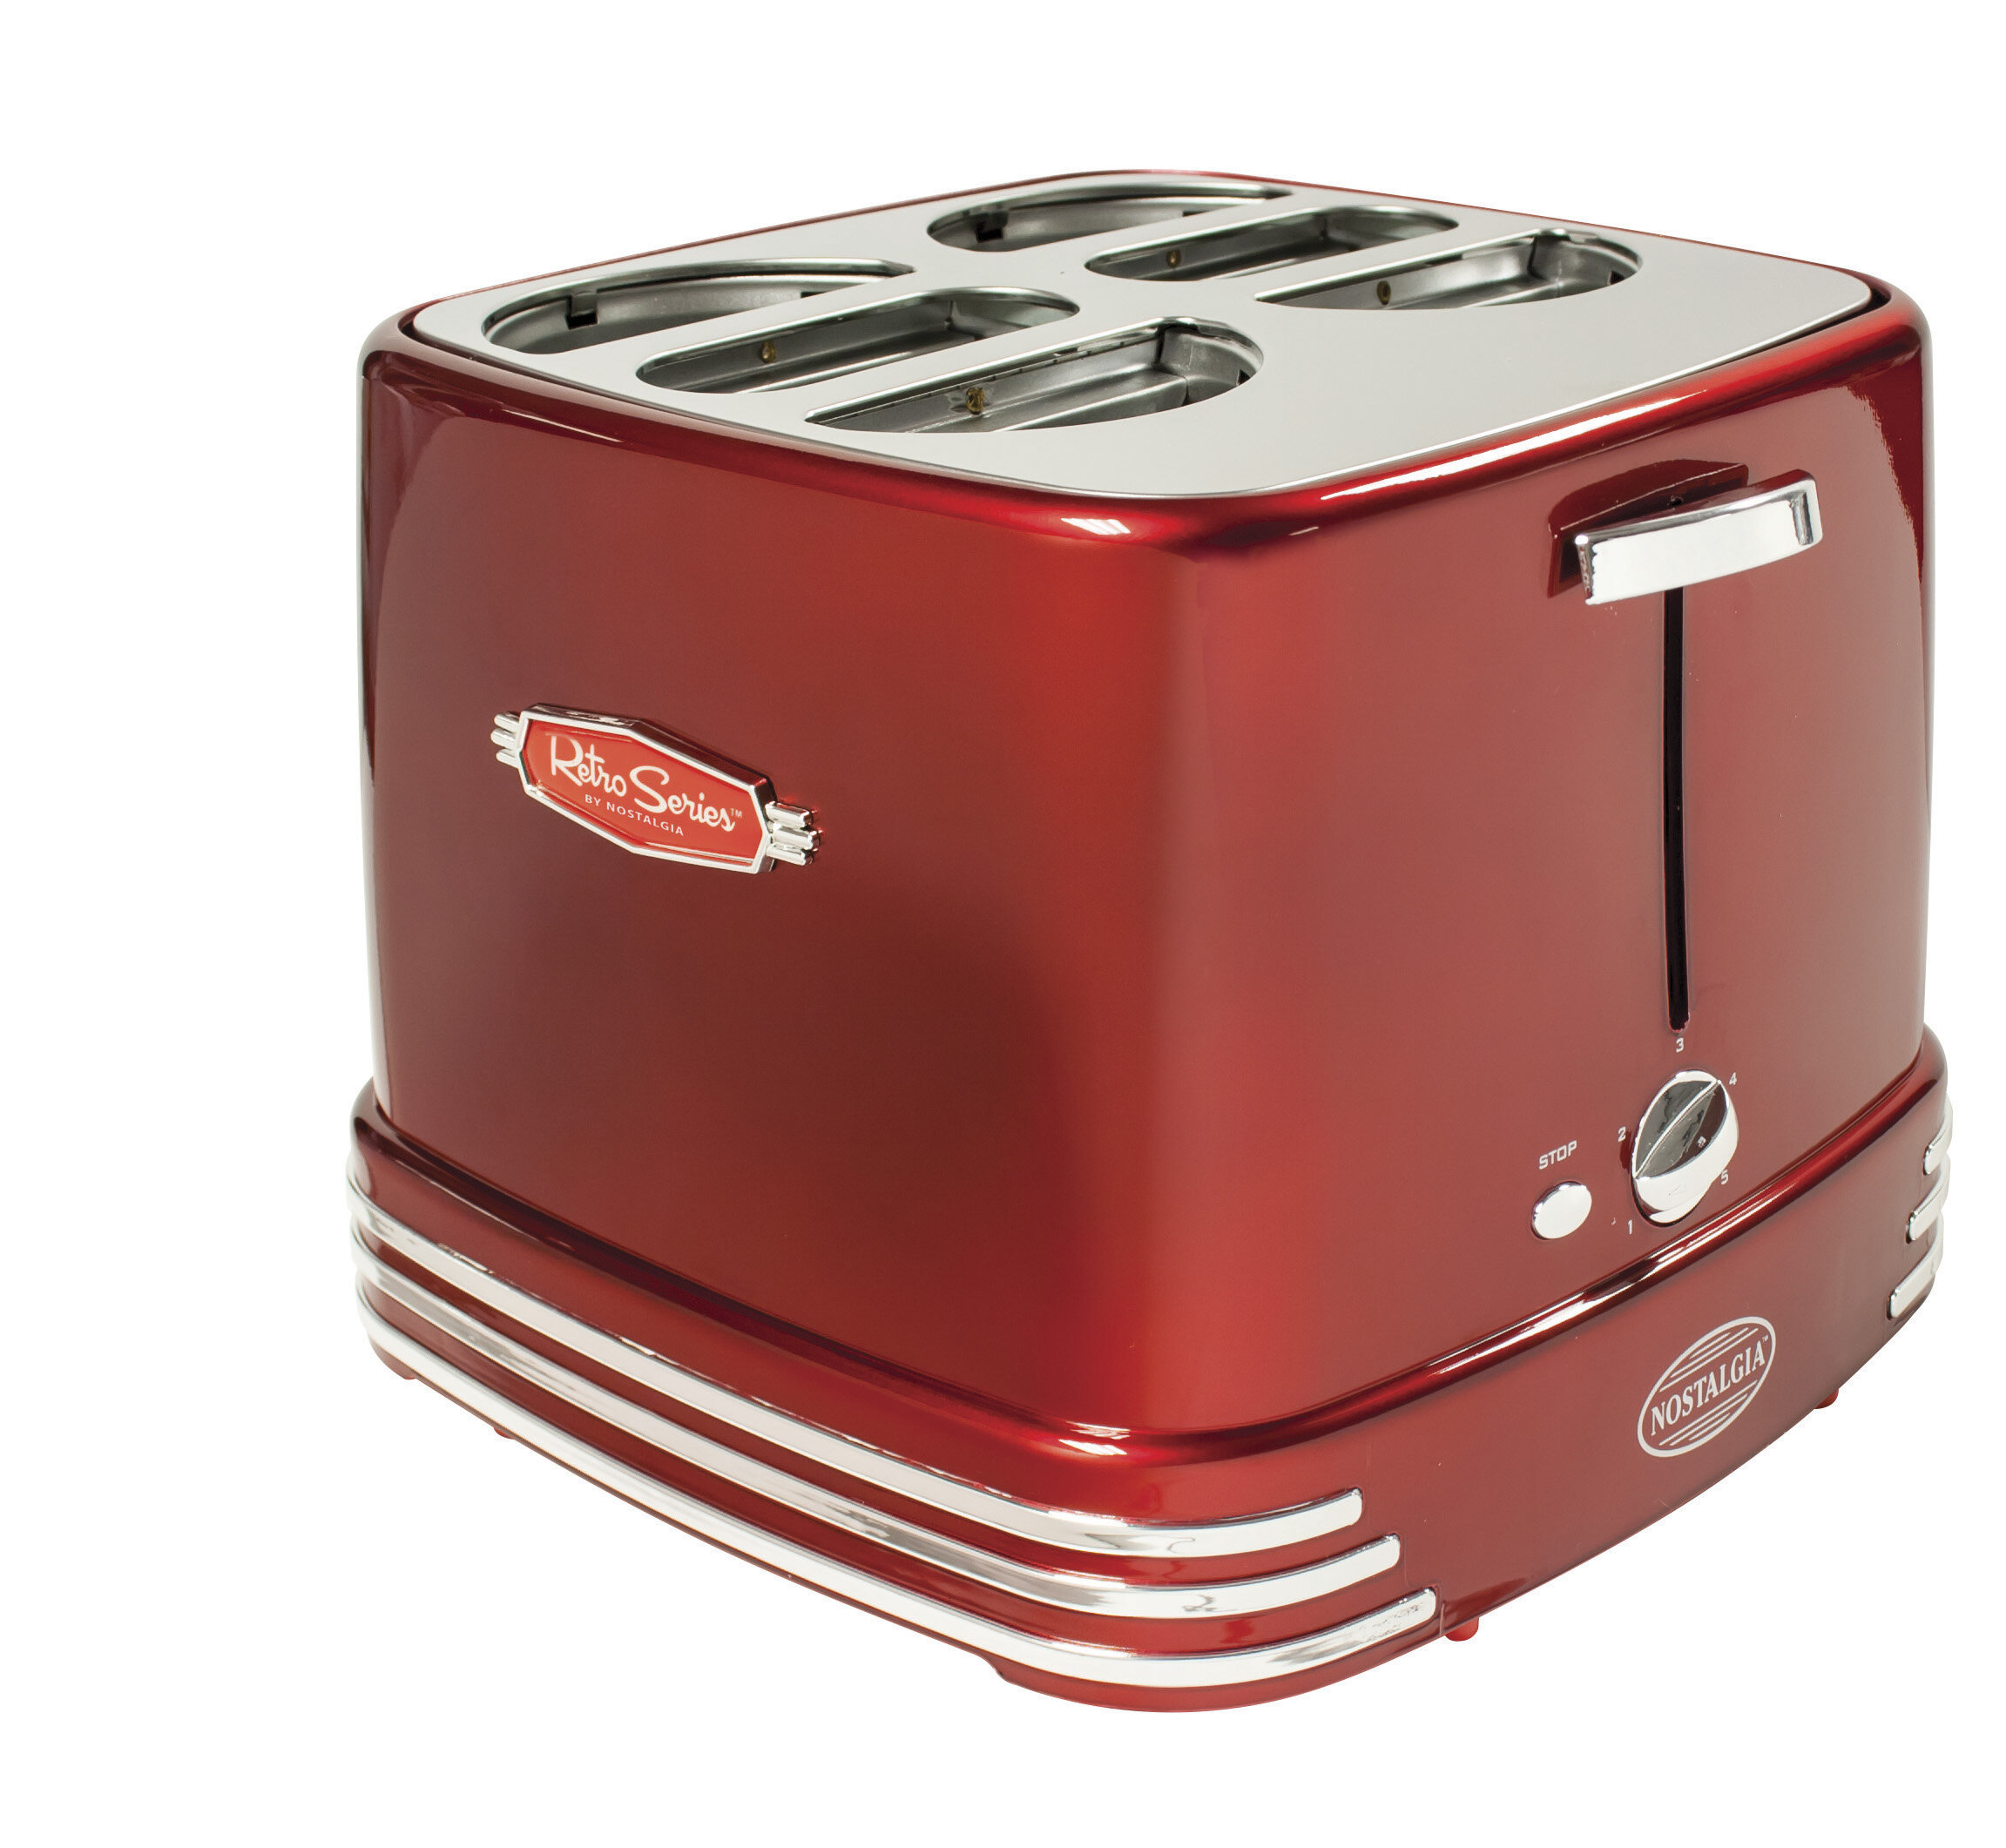 Turkey Salton Treats Pop-Up Toaster for Extra Large Authentic Stadium-Style Hot Dogs and Buns With Bonus Mini Tongs Included Veggie Sausages and Brats 650 Watts HD1911 Red Perfect for Chicken